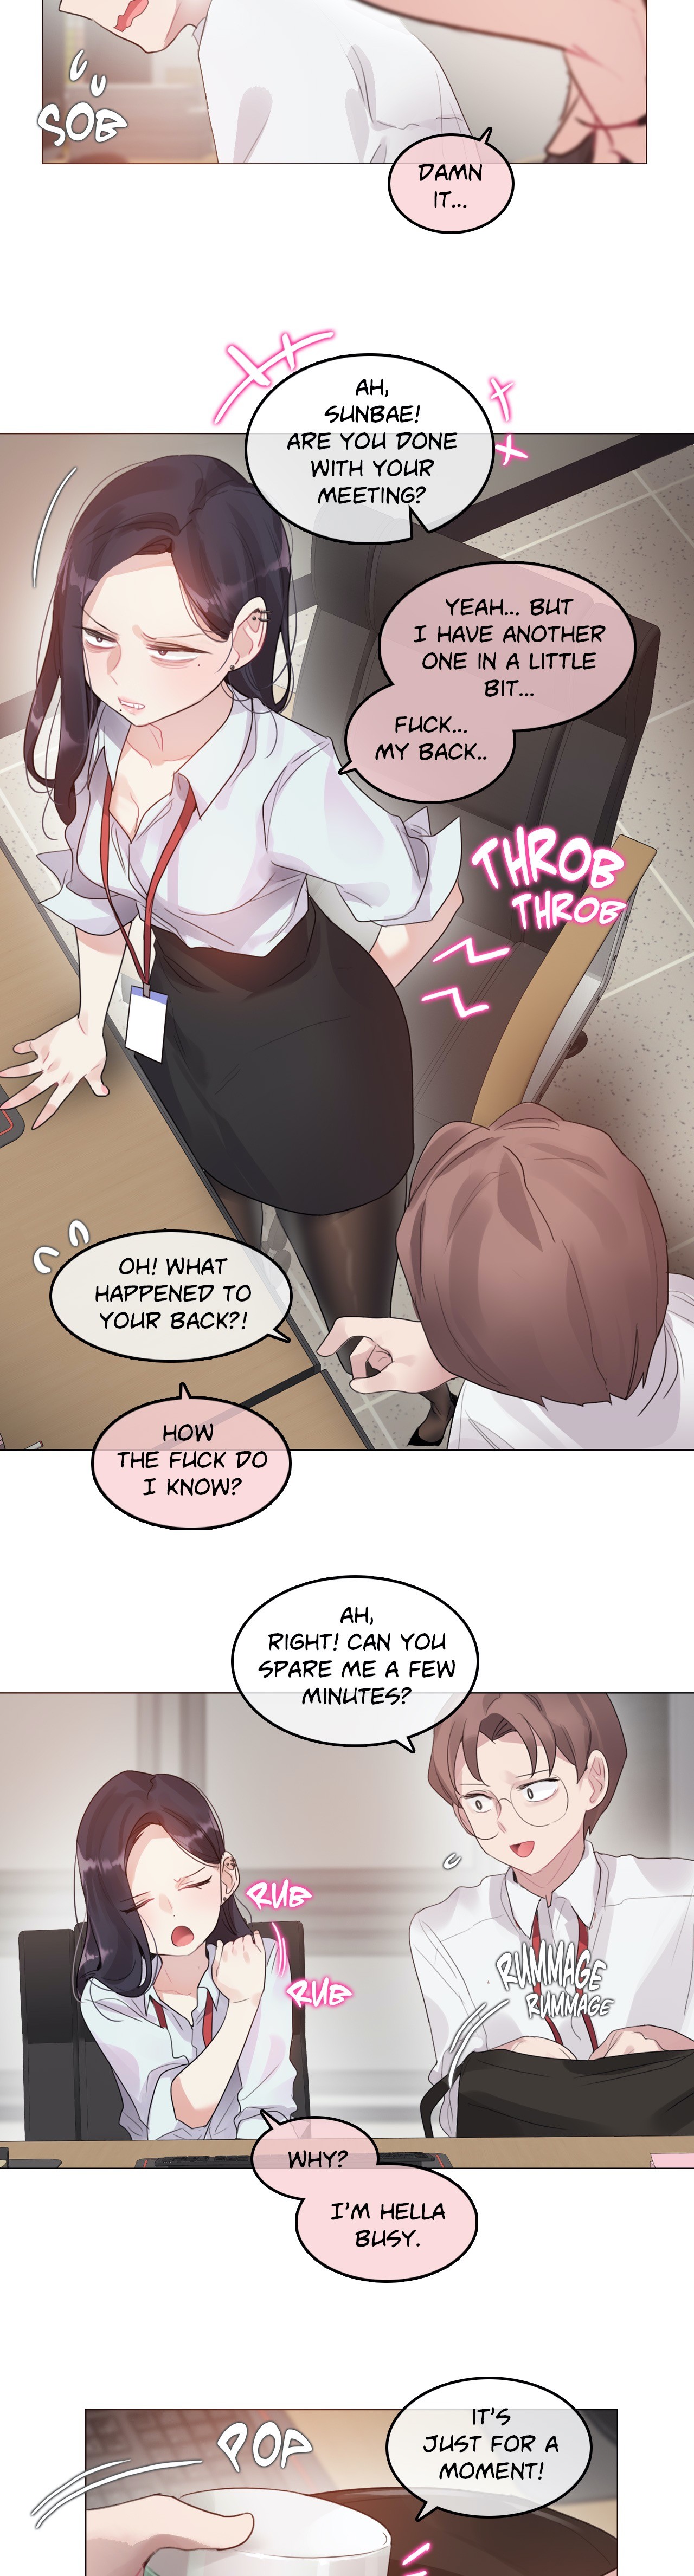 A Pervert’s Daily Life - Chapter 106 Page 5